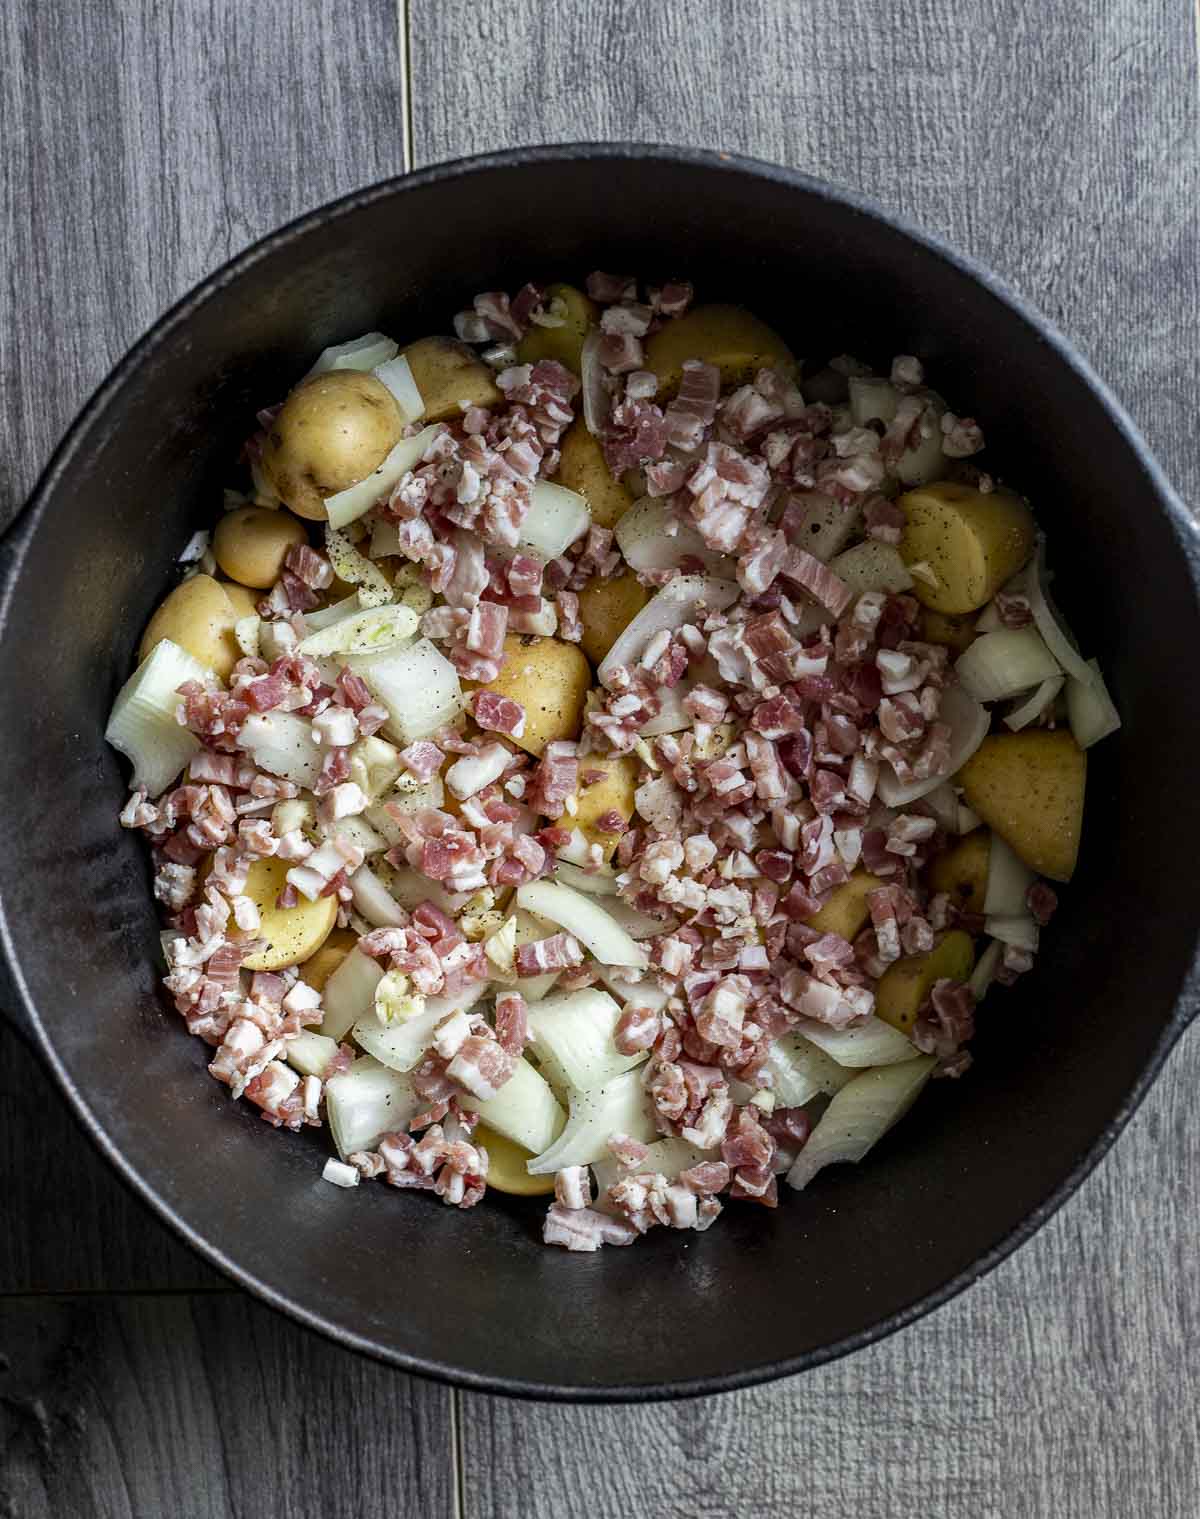 Mini potatoes, onions, garlic and pancetta arranged in the bottom of a Dutch oven.